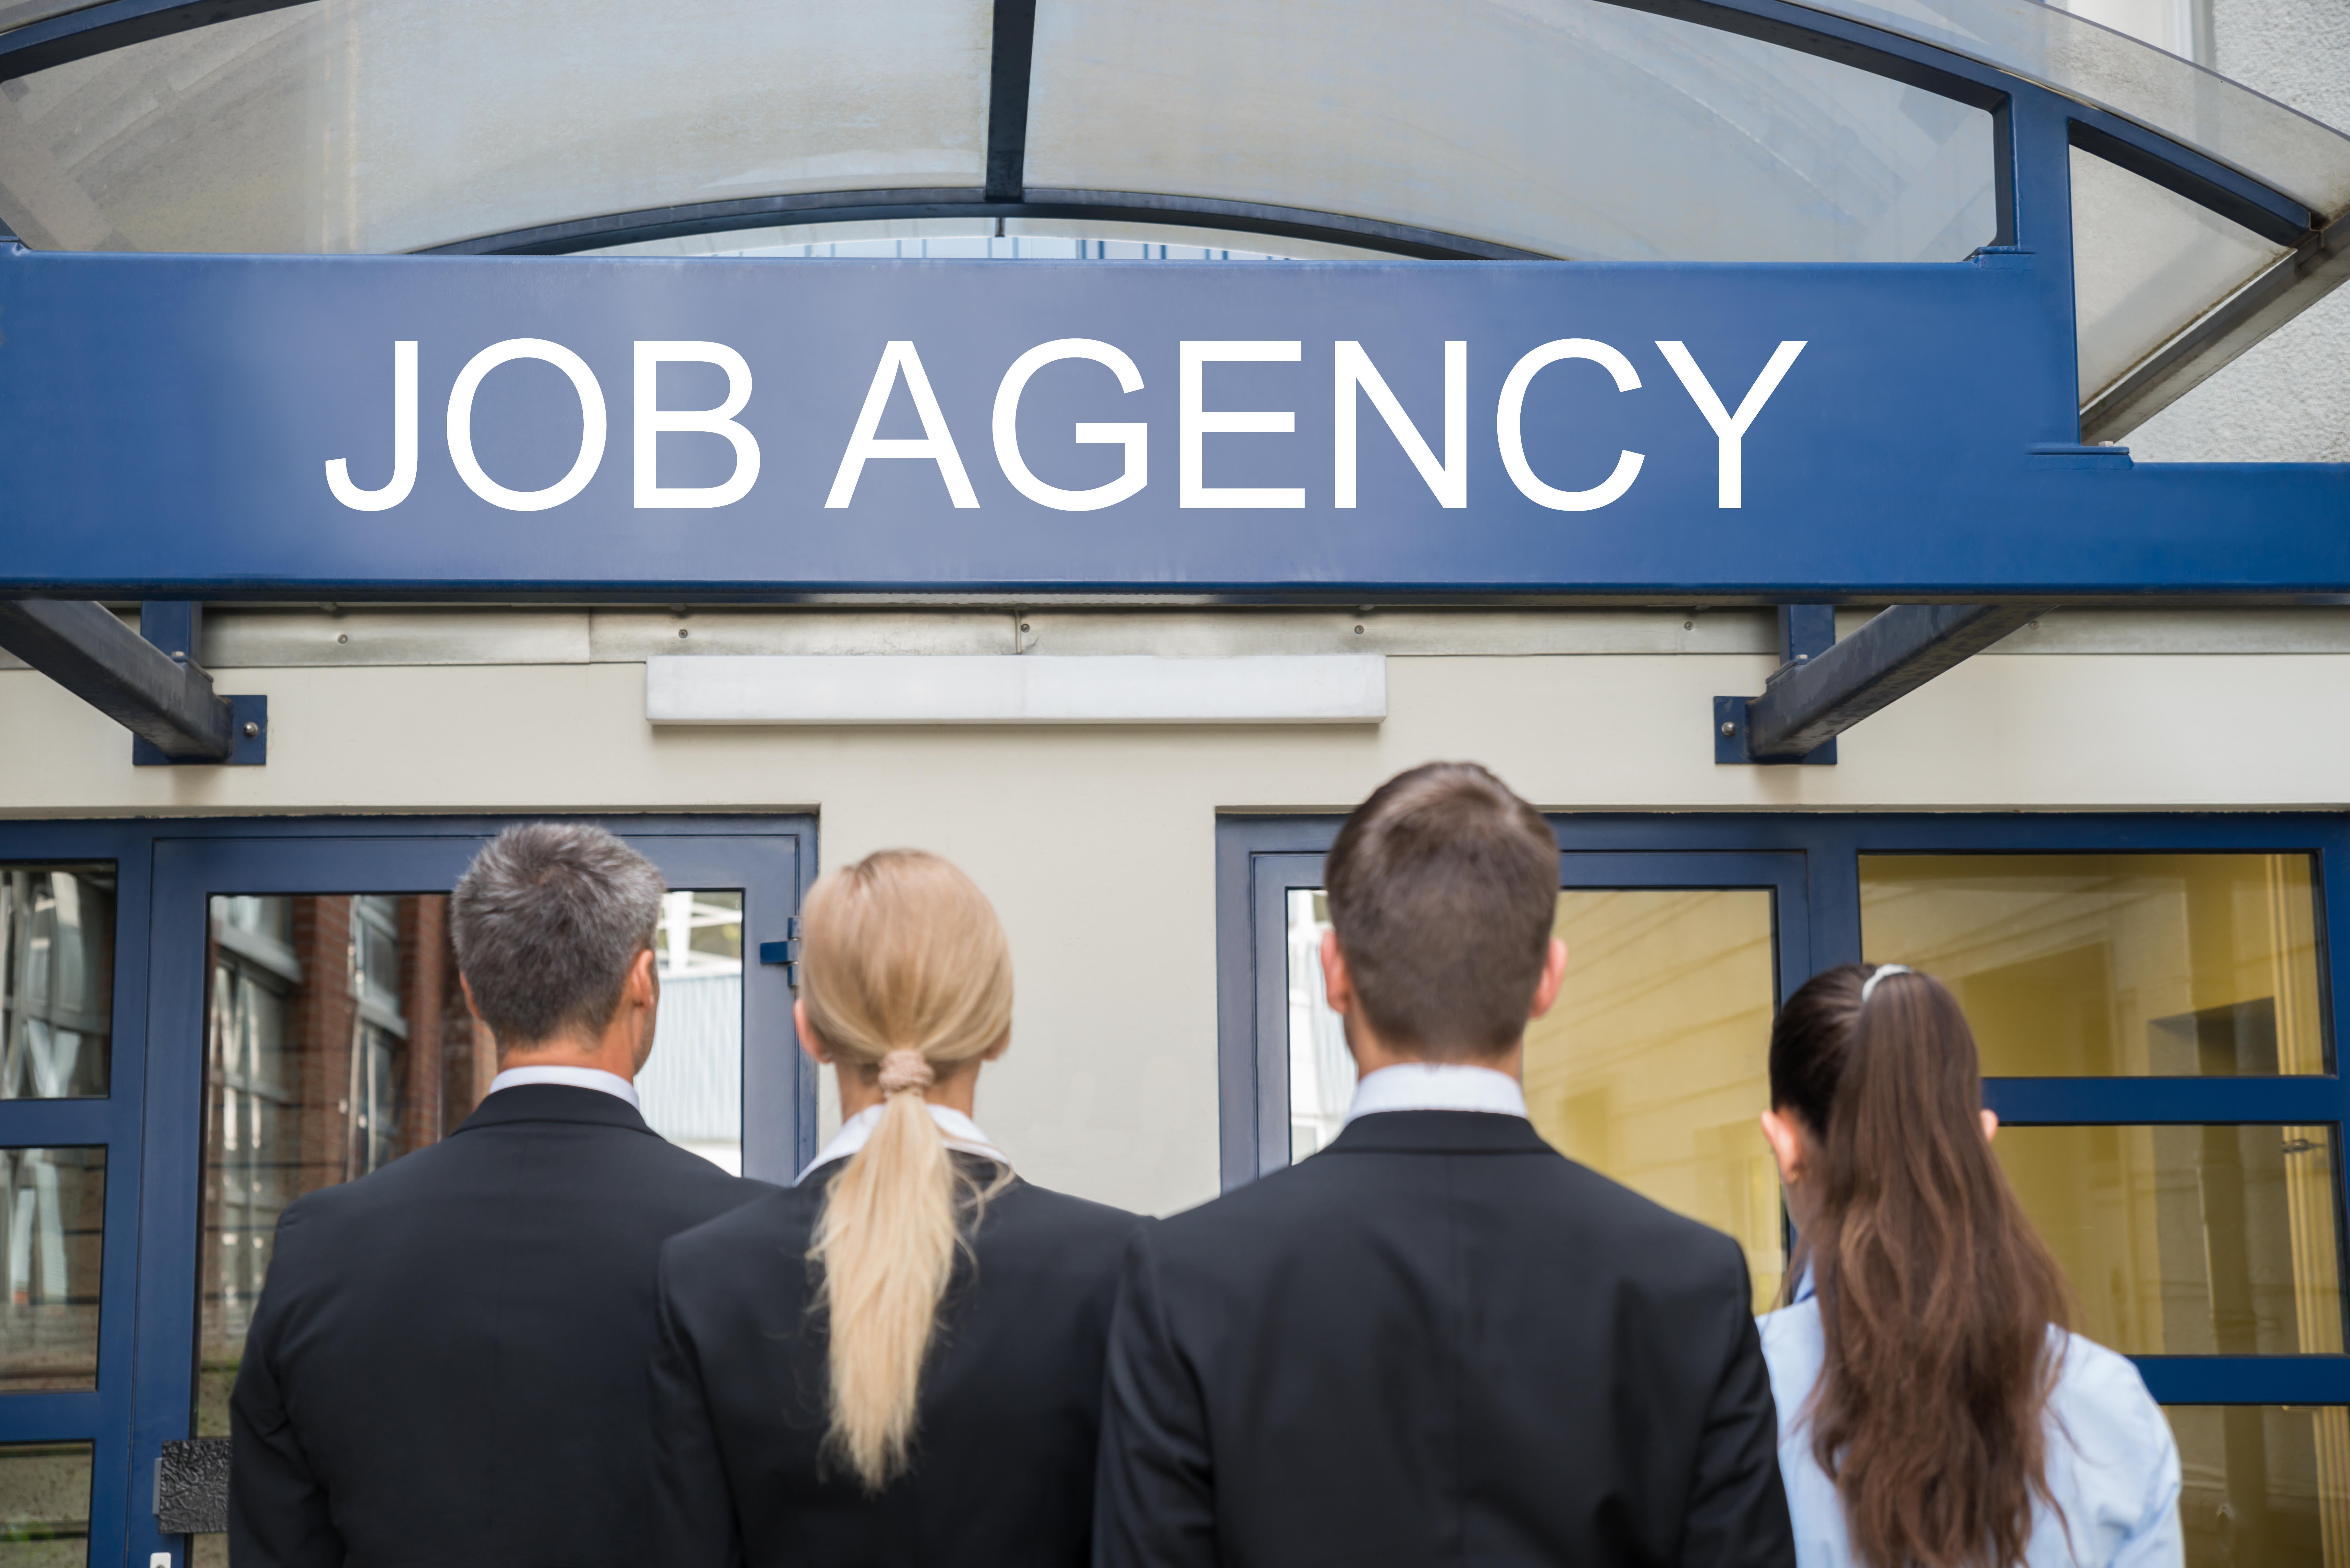 Businesses can now provide skilled agency workers to plug staffing gaps caused by strike action under changes to the law coming into force on Thursday, the Government has announced (Alamy/PA)